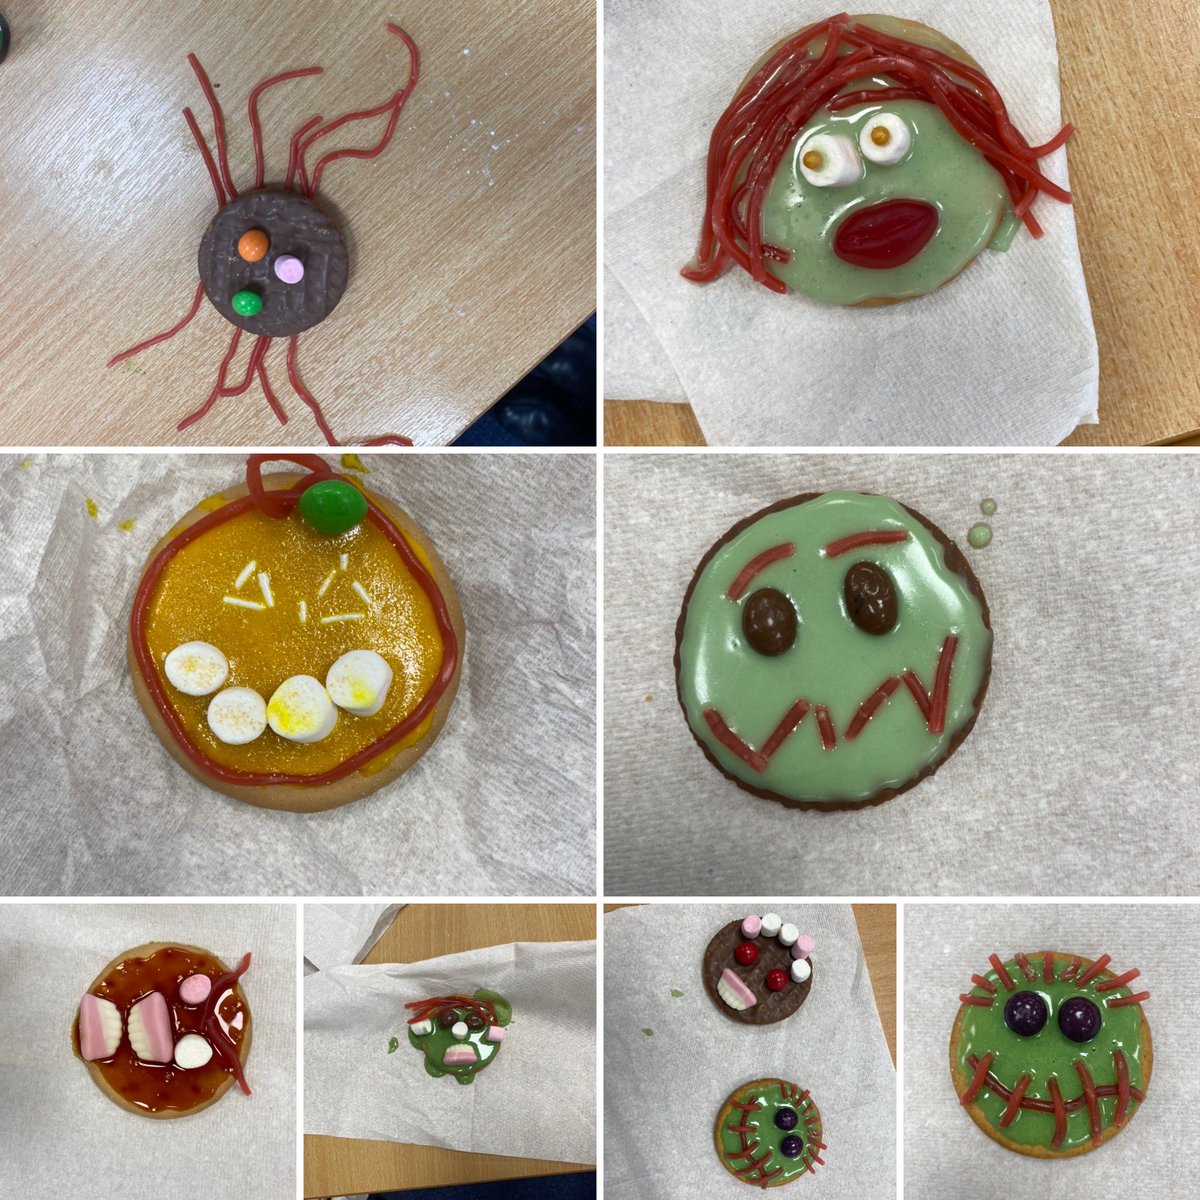 Trick or Treat 🎃 Thank you to our HND childhood practice students today participating in spooky biscuit making !! @SLCek @SLC_ELC @Angela_R_ELC #ChooseCollege